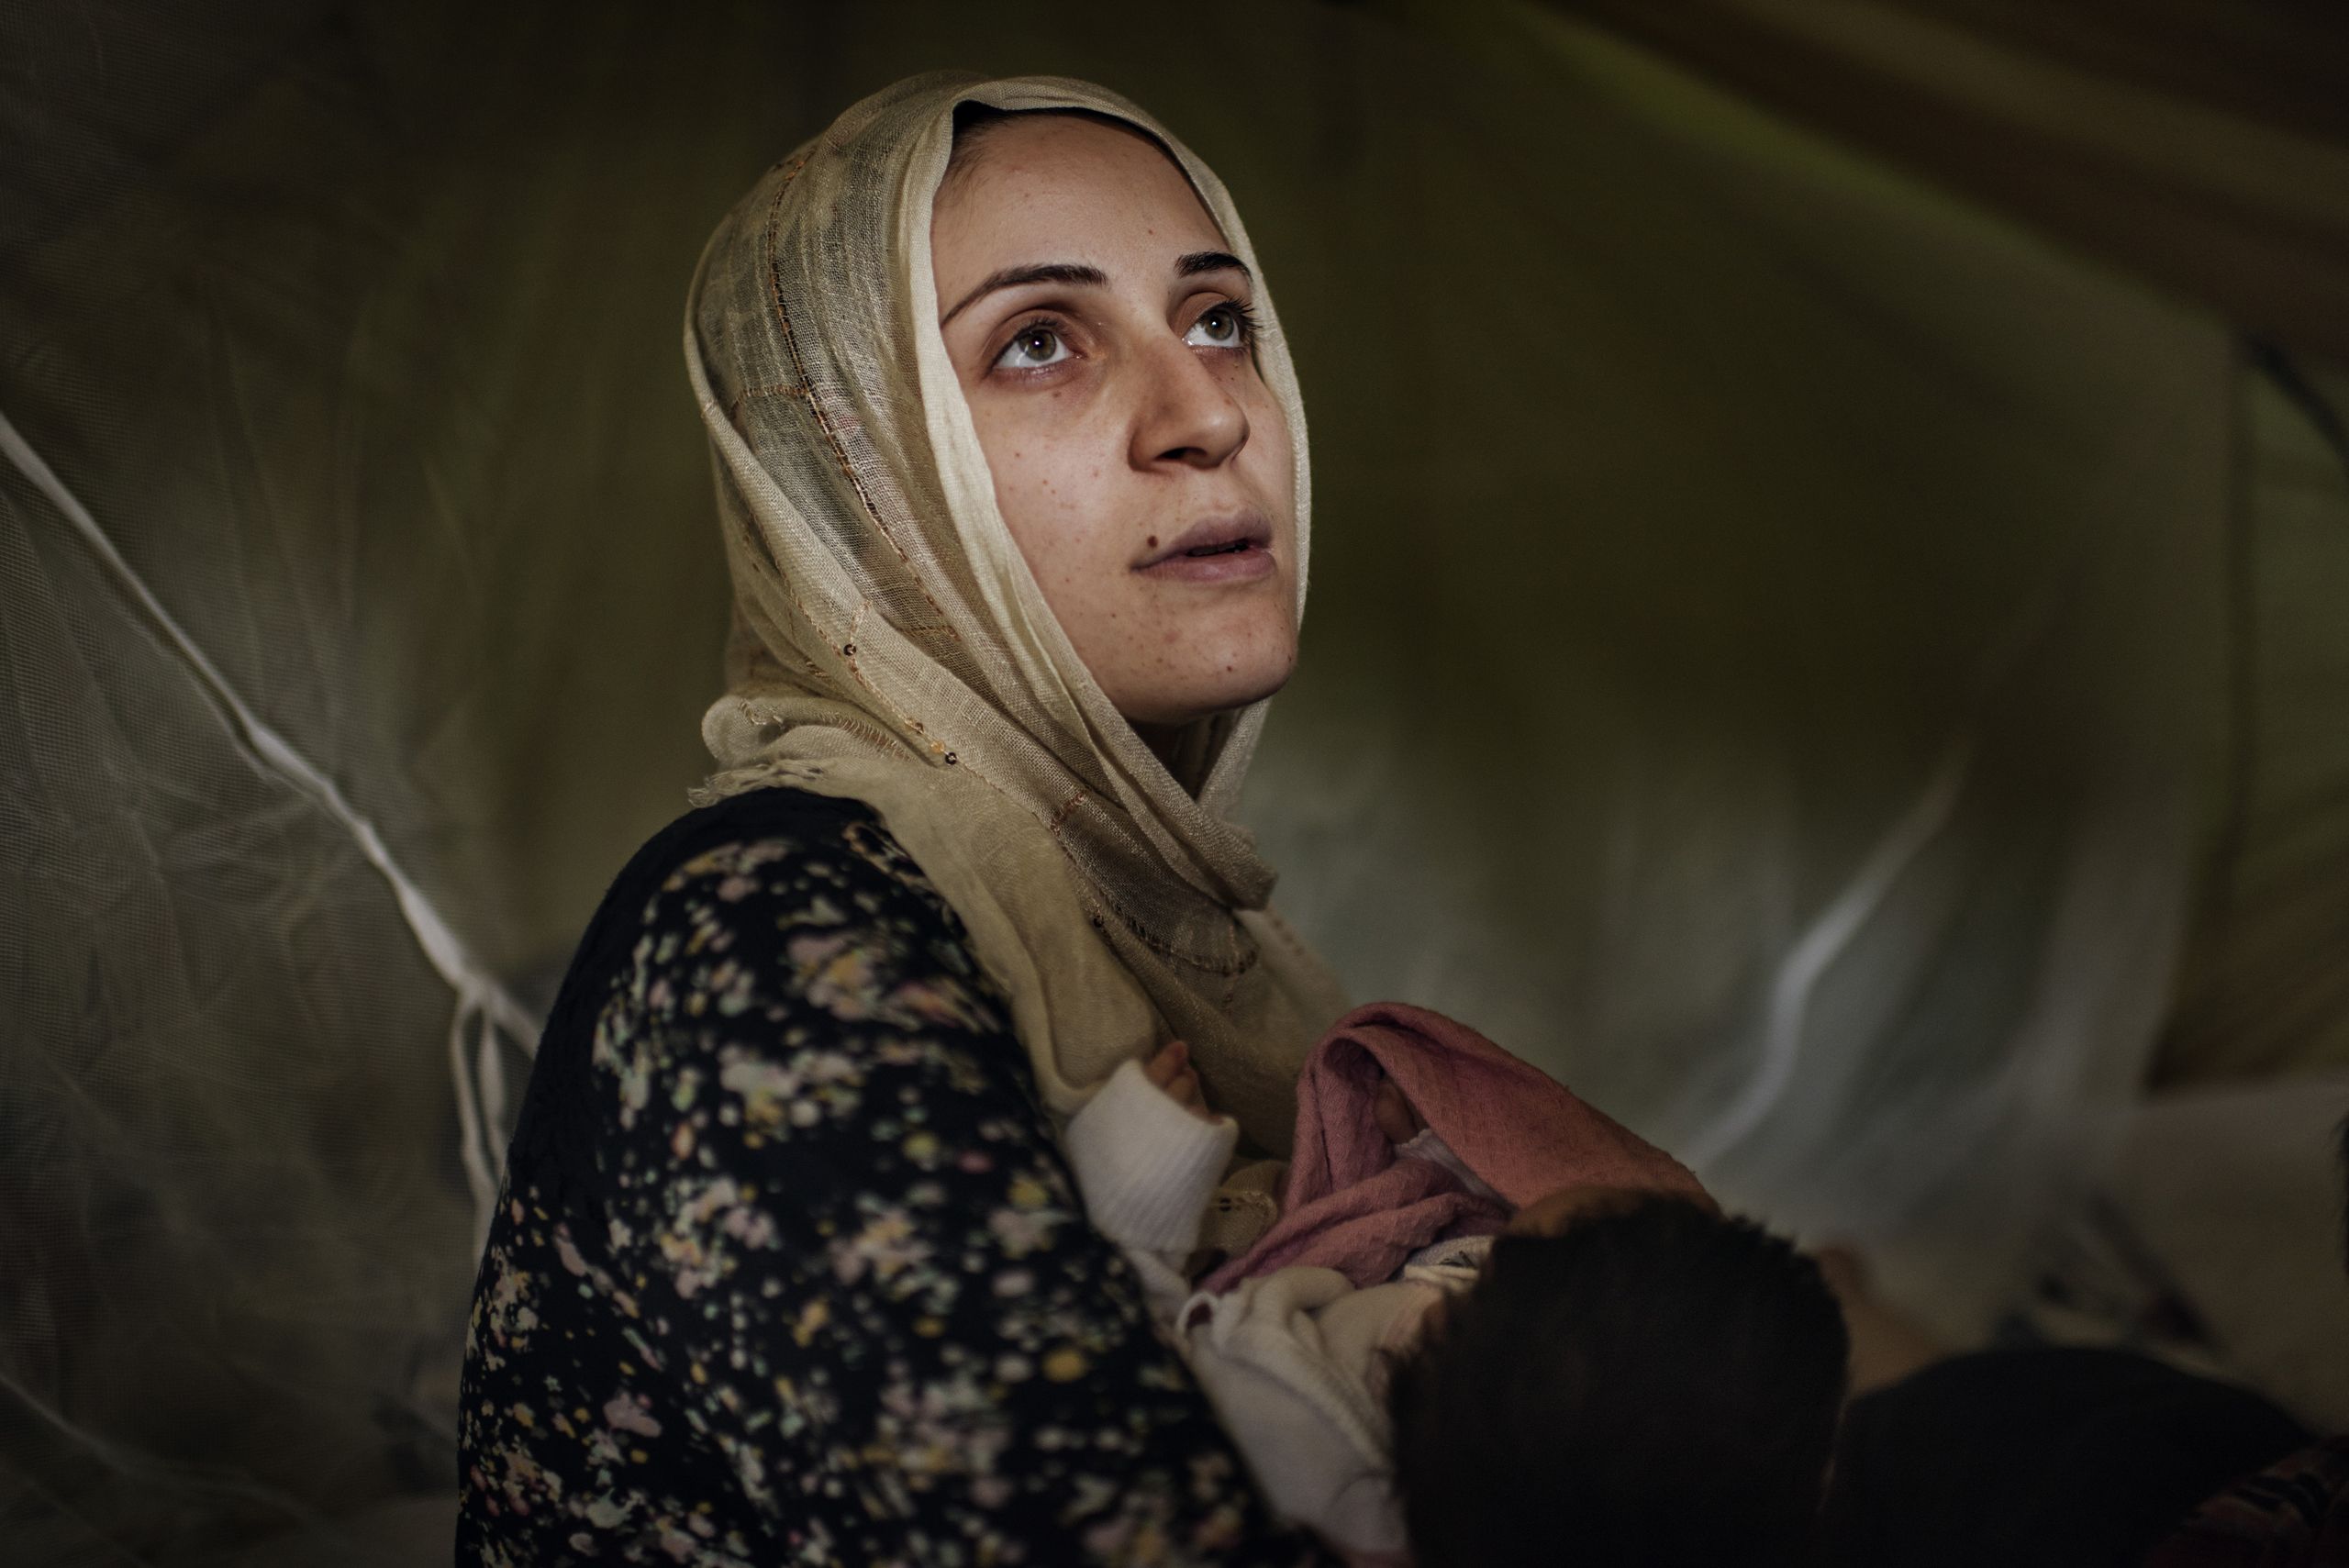 Taimaa Abazli, 24, holds her new baby Heln in their tent at the Karamalis camp in Thessaloniki. Image by Lynsey Addario for TIME. Greece, 2016.